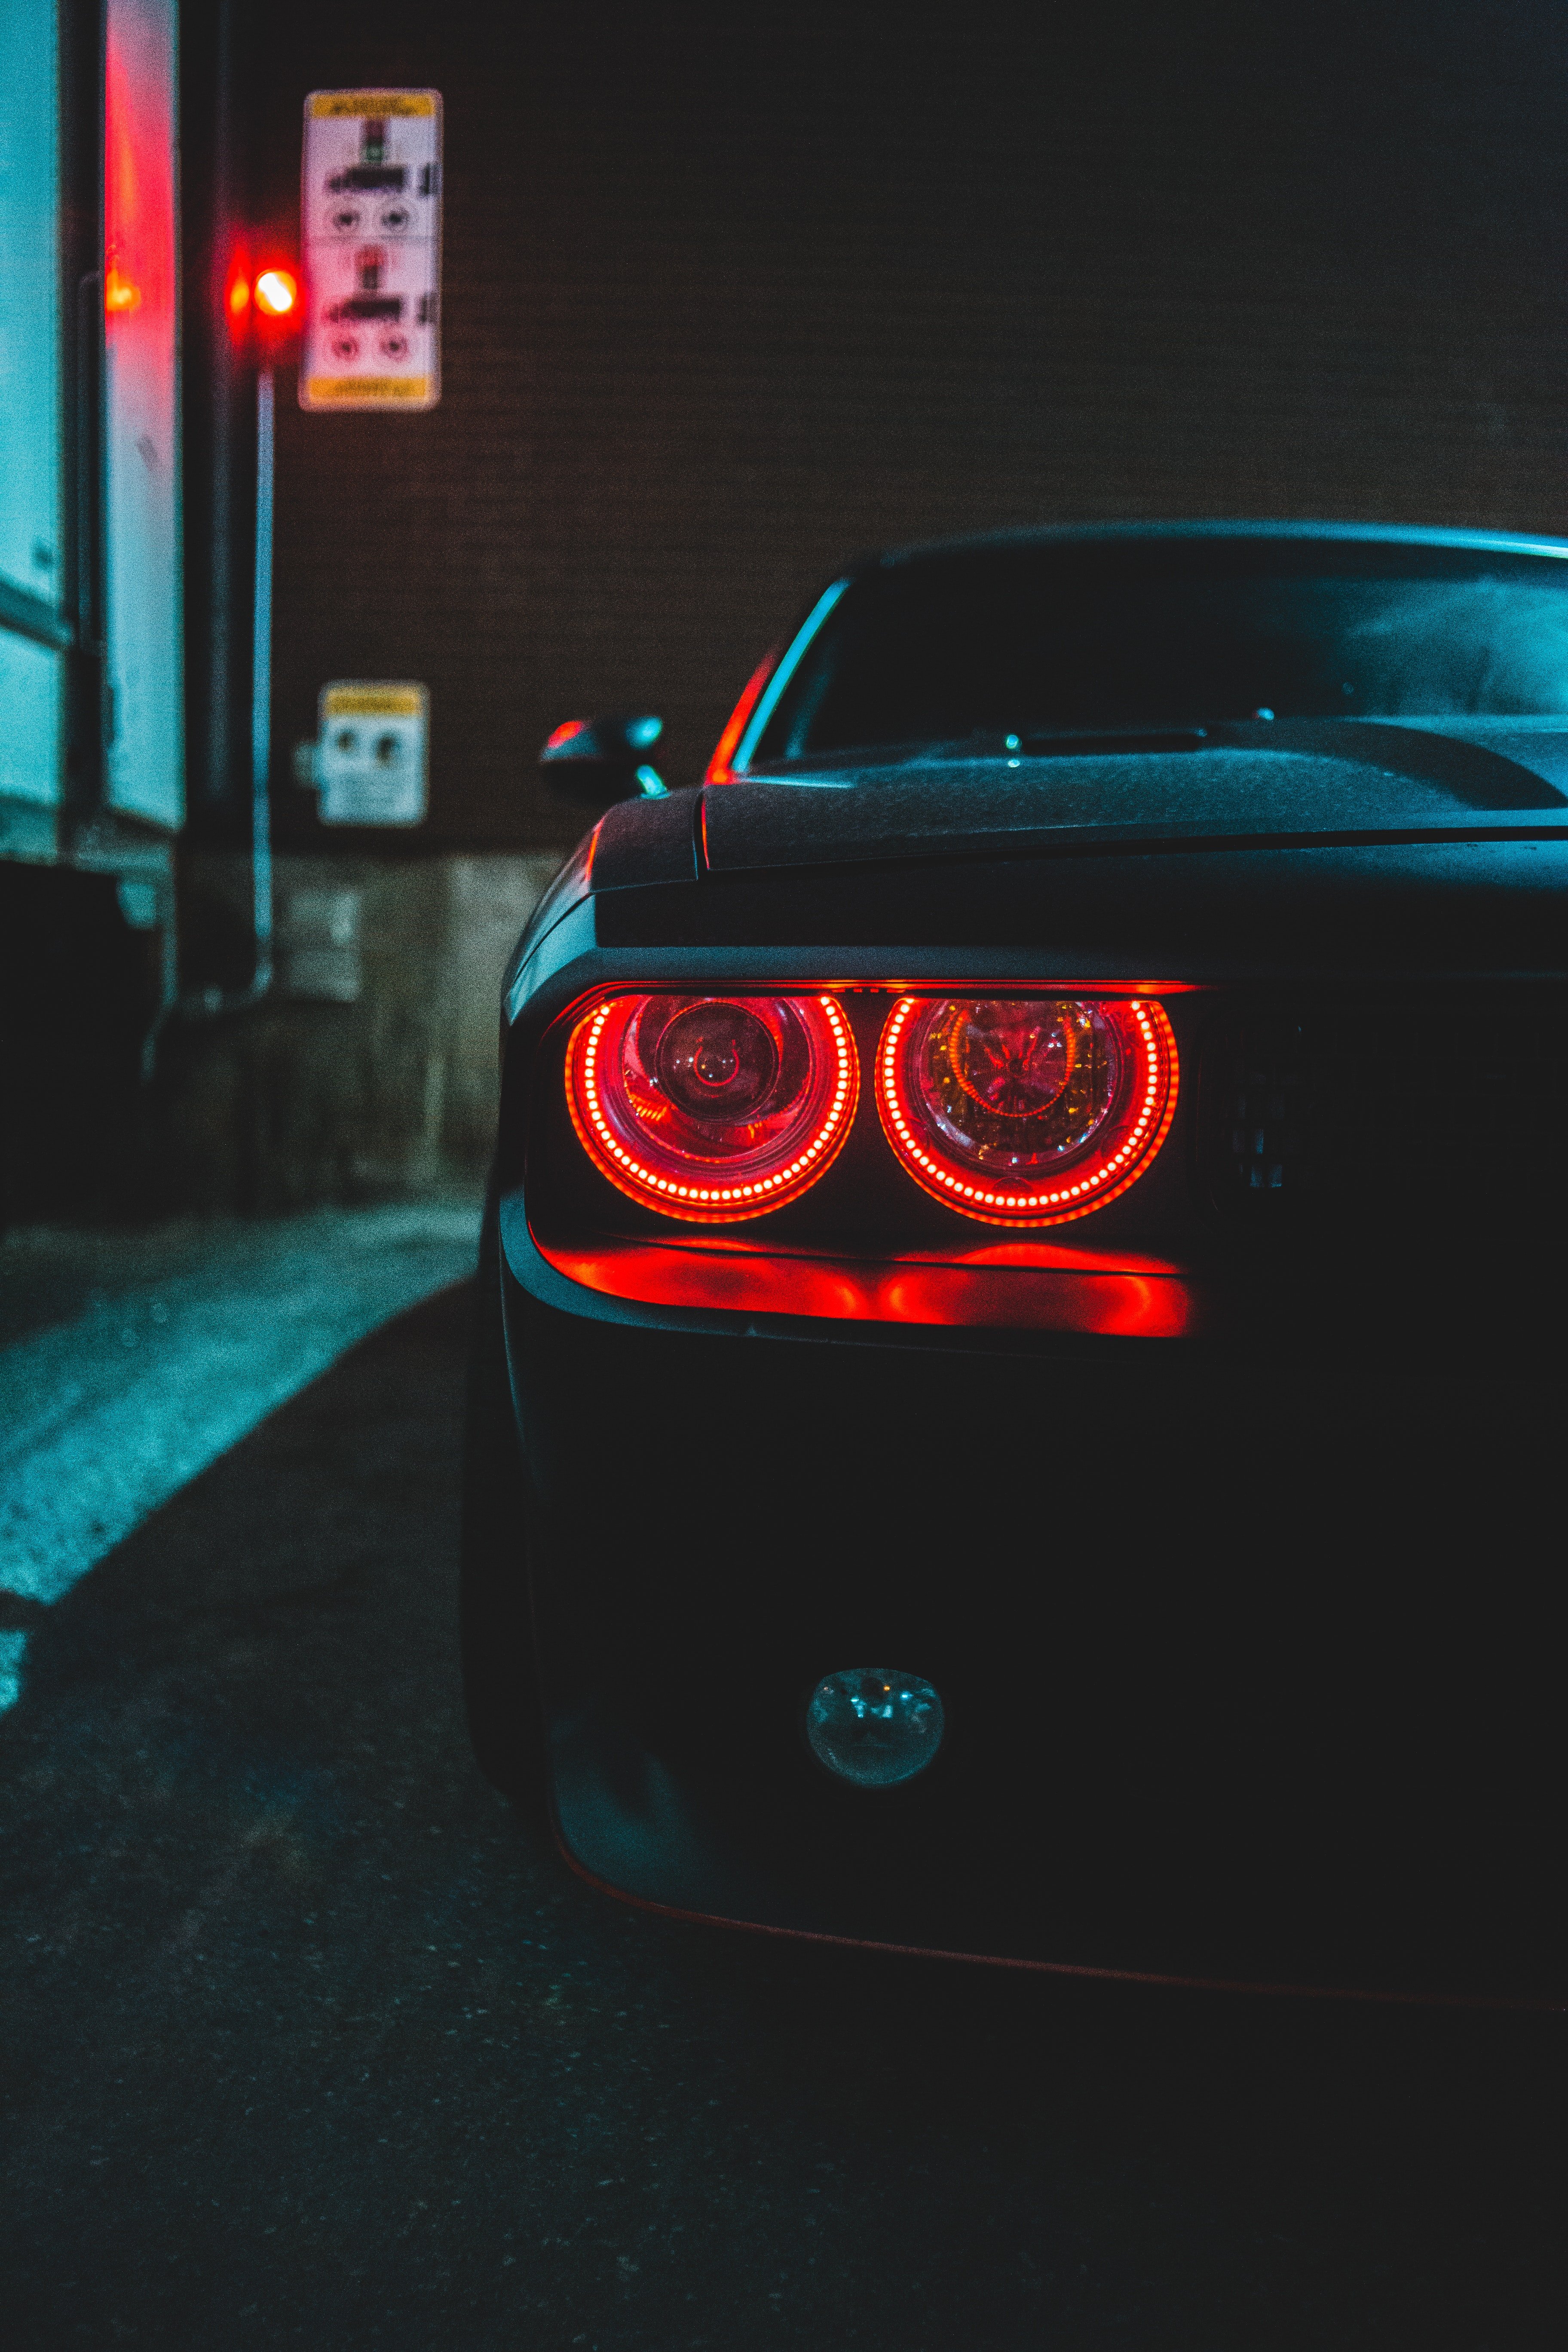 Sam witnessed a drive-by shooting. | Source: Pexels